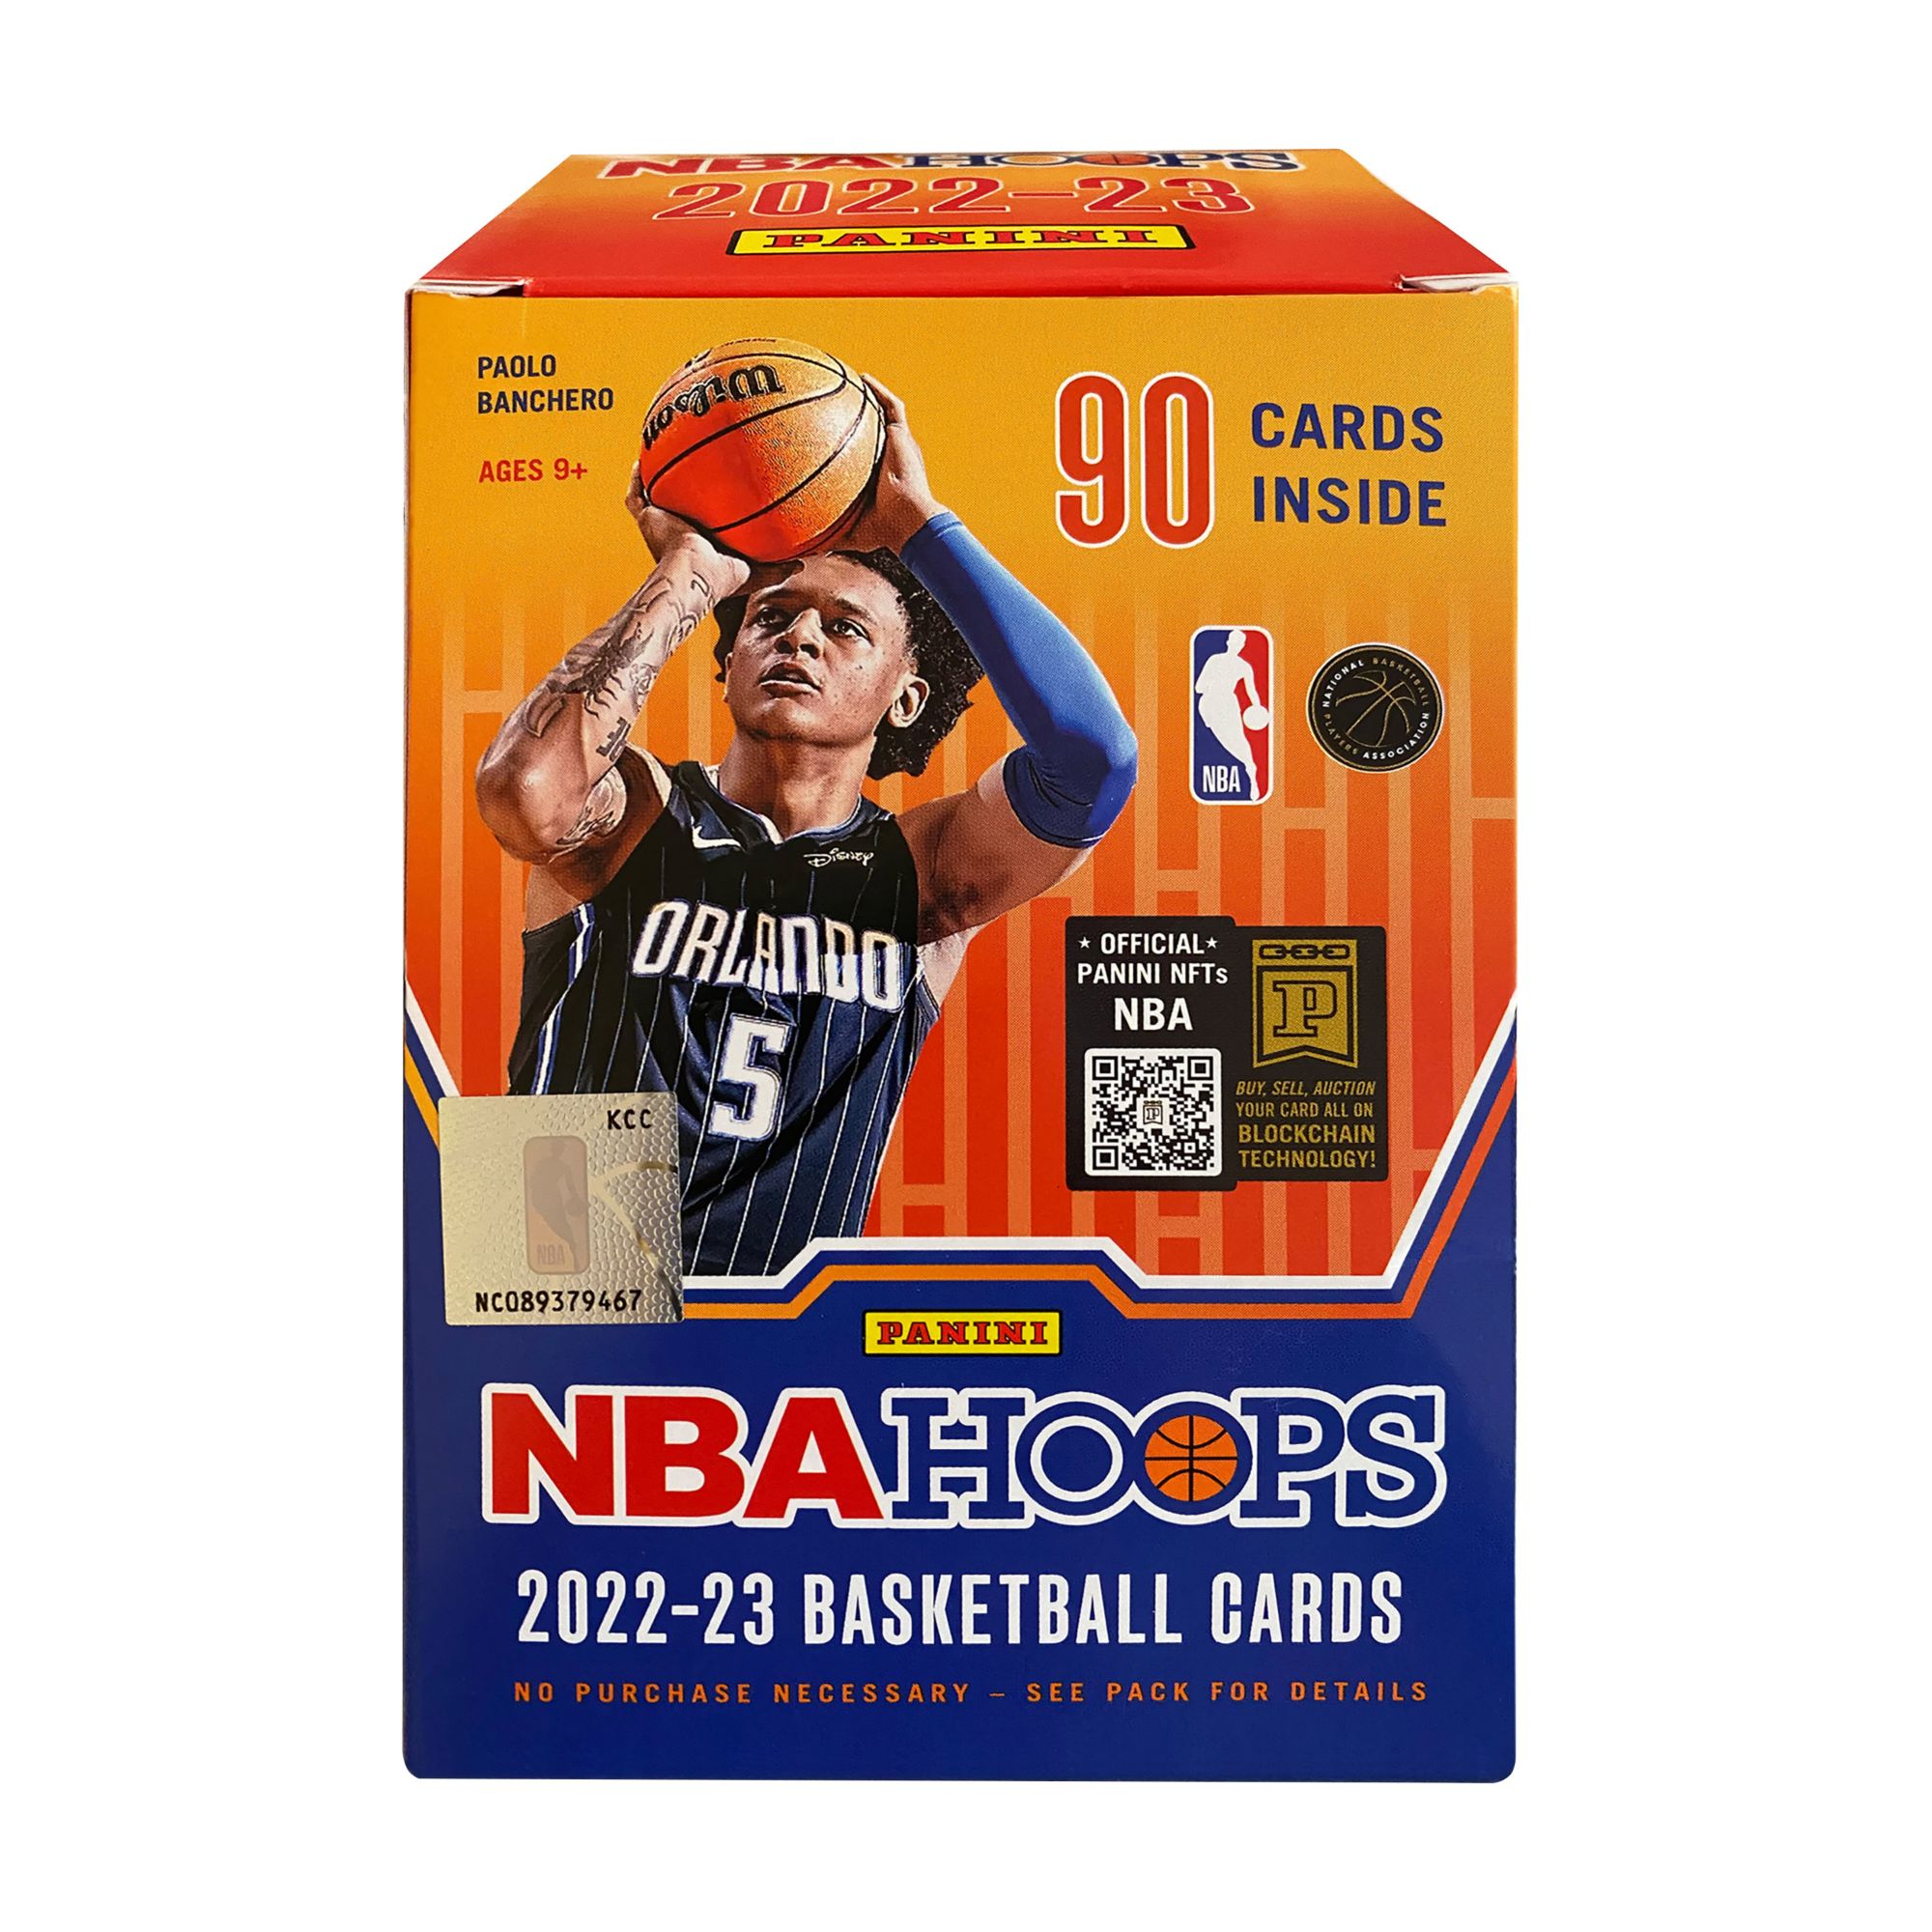 Cardboard History : How to read the back of an NBA Basketball Card